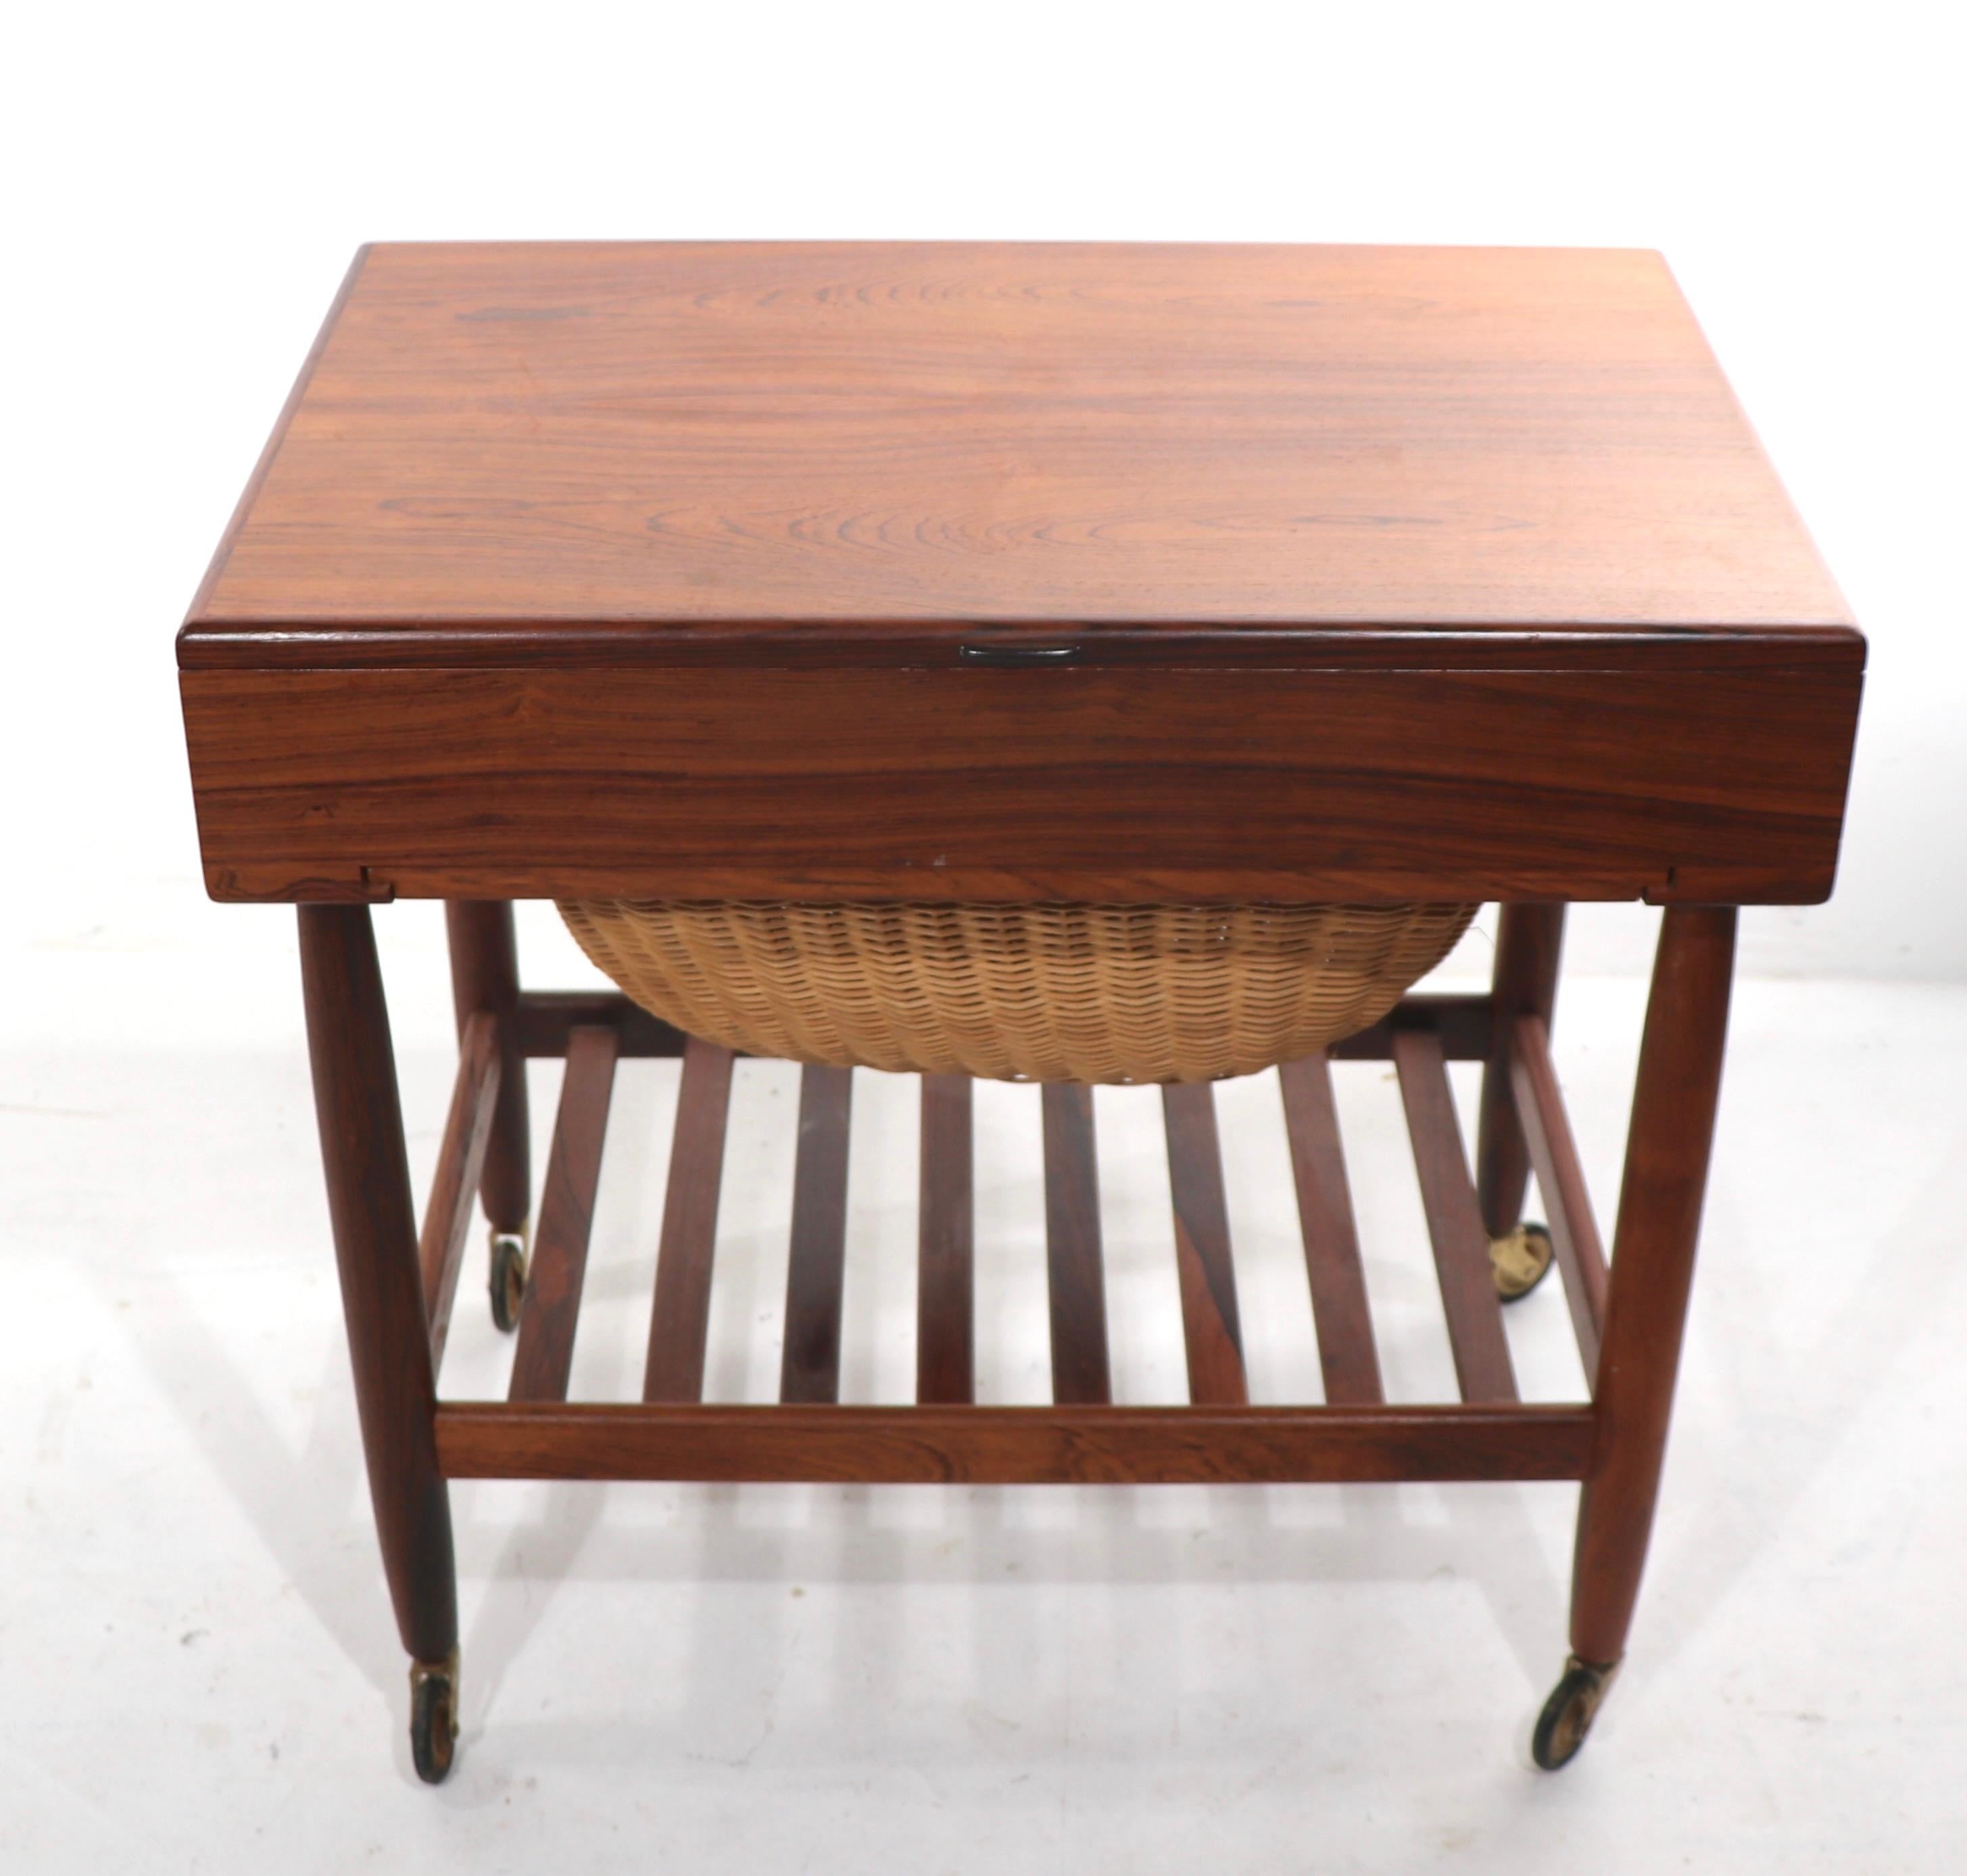 Exceptional Danish design sewing cart, designed by Ejvind Johansson made in Denmark by FDB Mobler. The exterior is in stunning rosewood, and rosewood veneer, while the interior is in a contrasting blonde birch. Very clean, original, ready to use